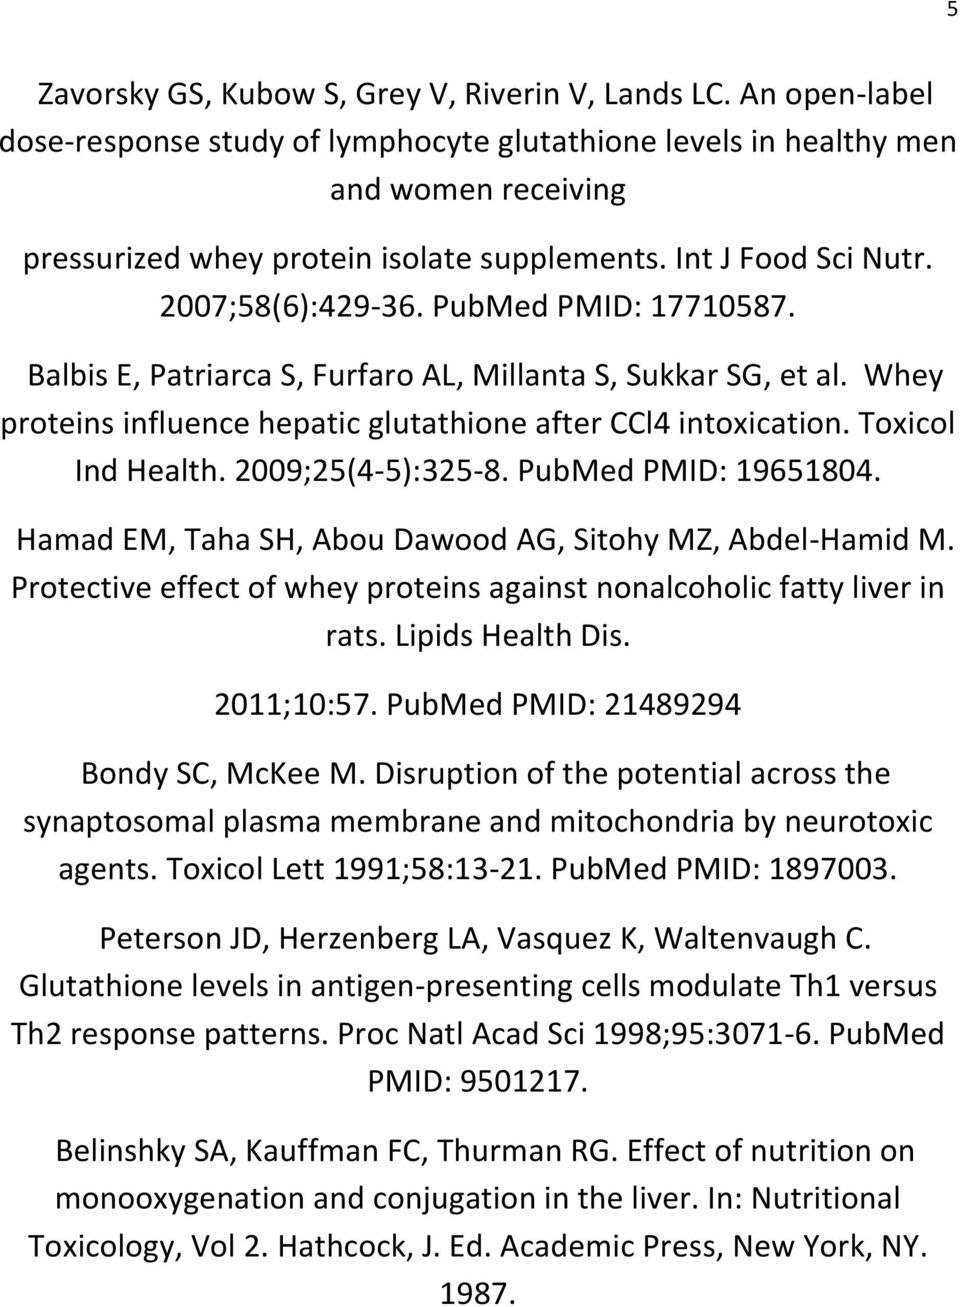 Toxicol Ind Health. 2009;25(4-5):325-8. PubMed PMID: 19651804. Hamad EM, Taha SH, Abou Dawood AG, Sitohy MZ, Abdel-Hamid M. Protective effect of whey proteins against nonalcoholic fatty liver in rats.